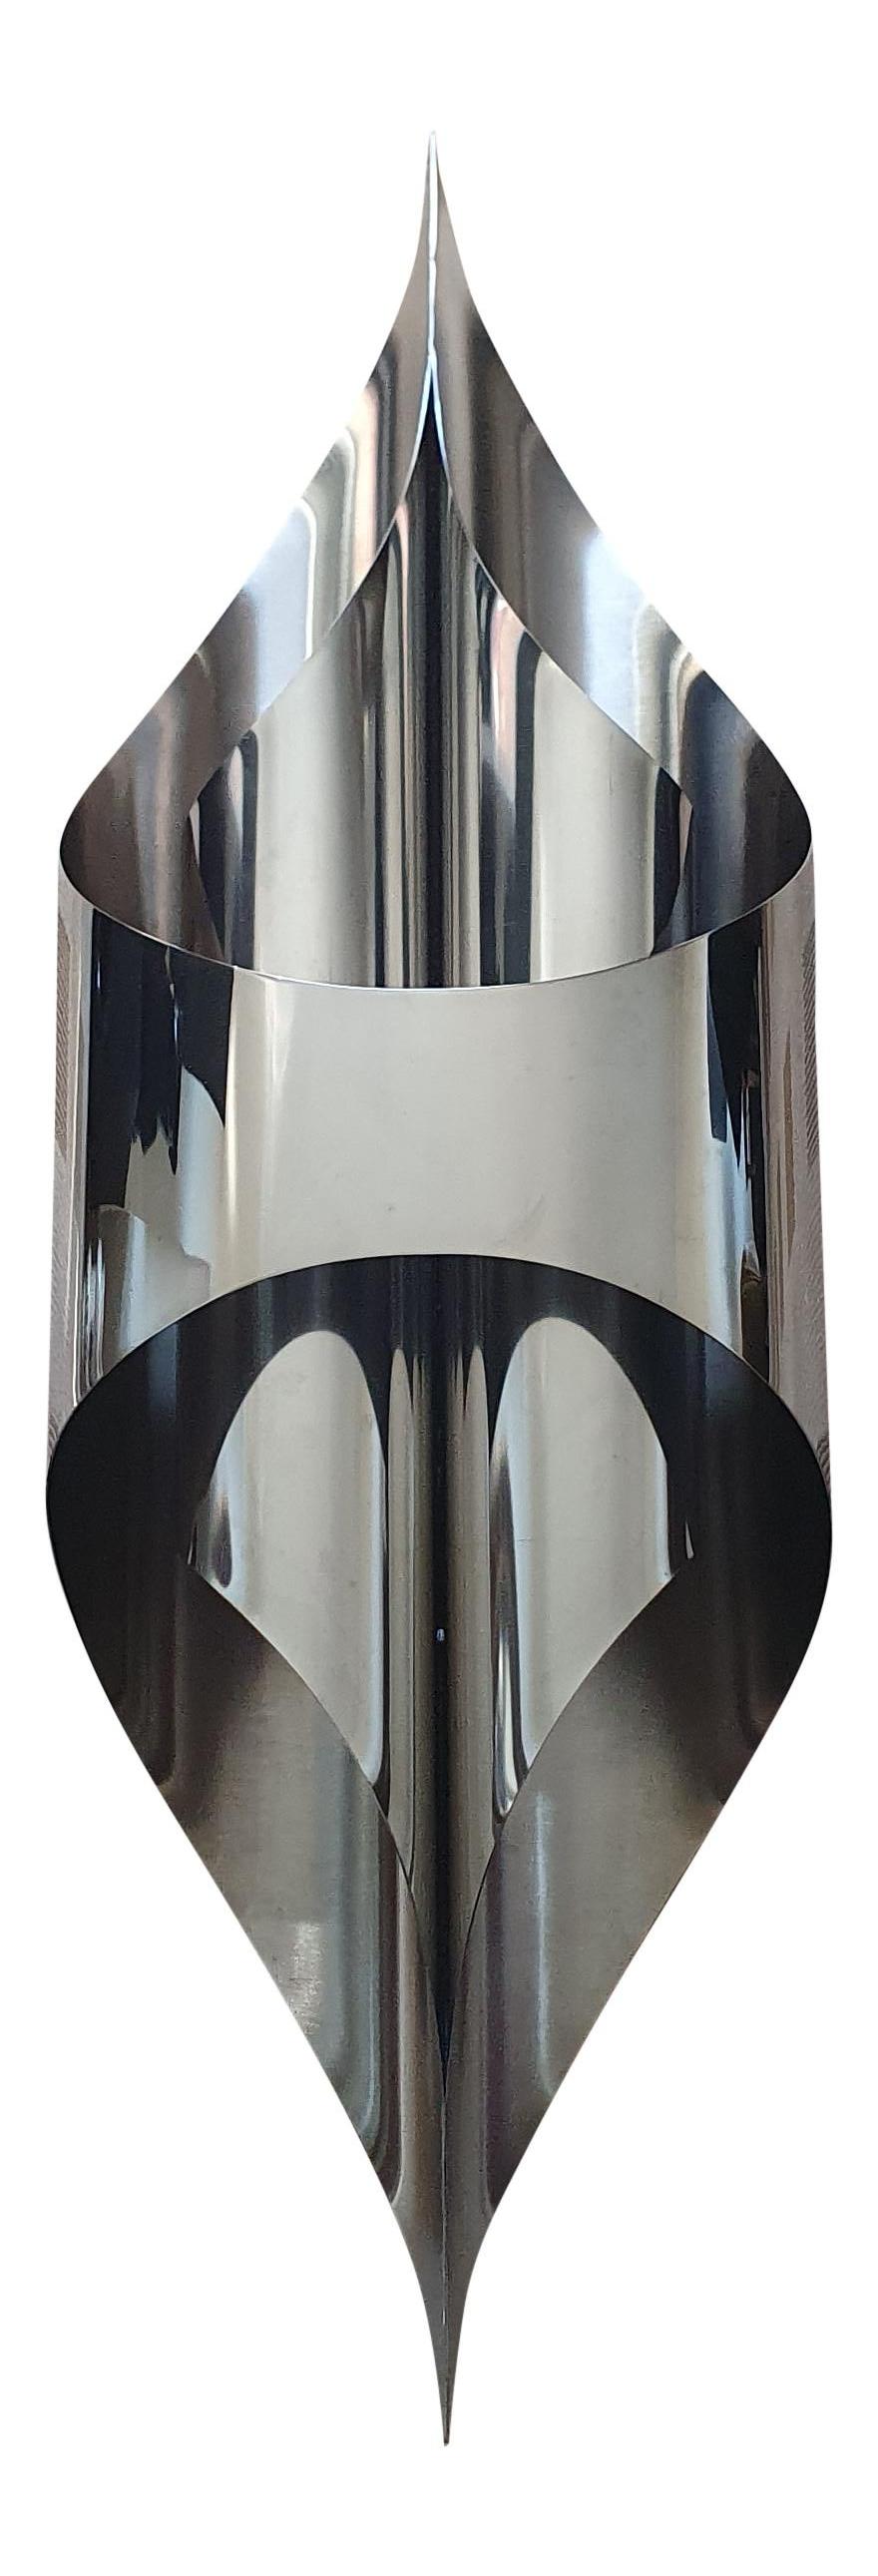 This stunning wall sconces by Maison Charles was made in this century but to the exact original design by Jacques Charles in the late 60s and early 70s.
Part of the renowned Inox collection and originally made of curved sheet steel, this one is